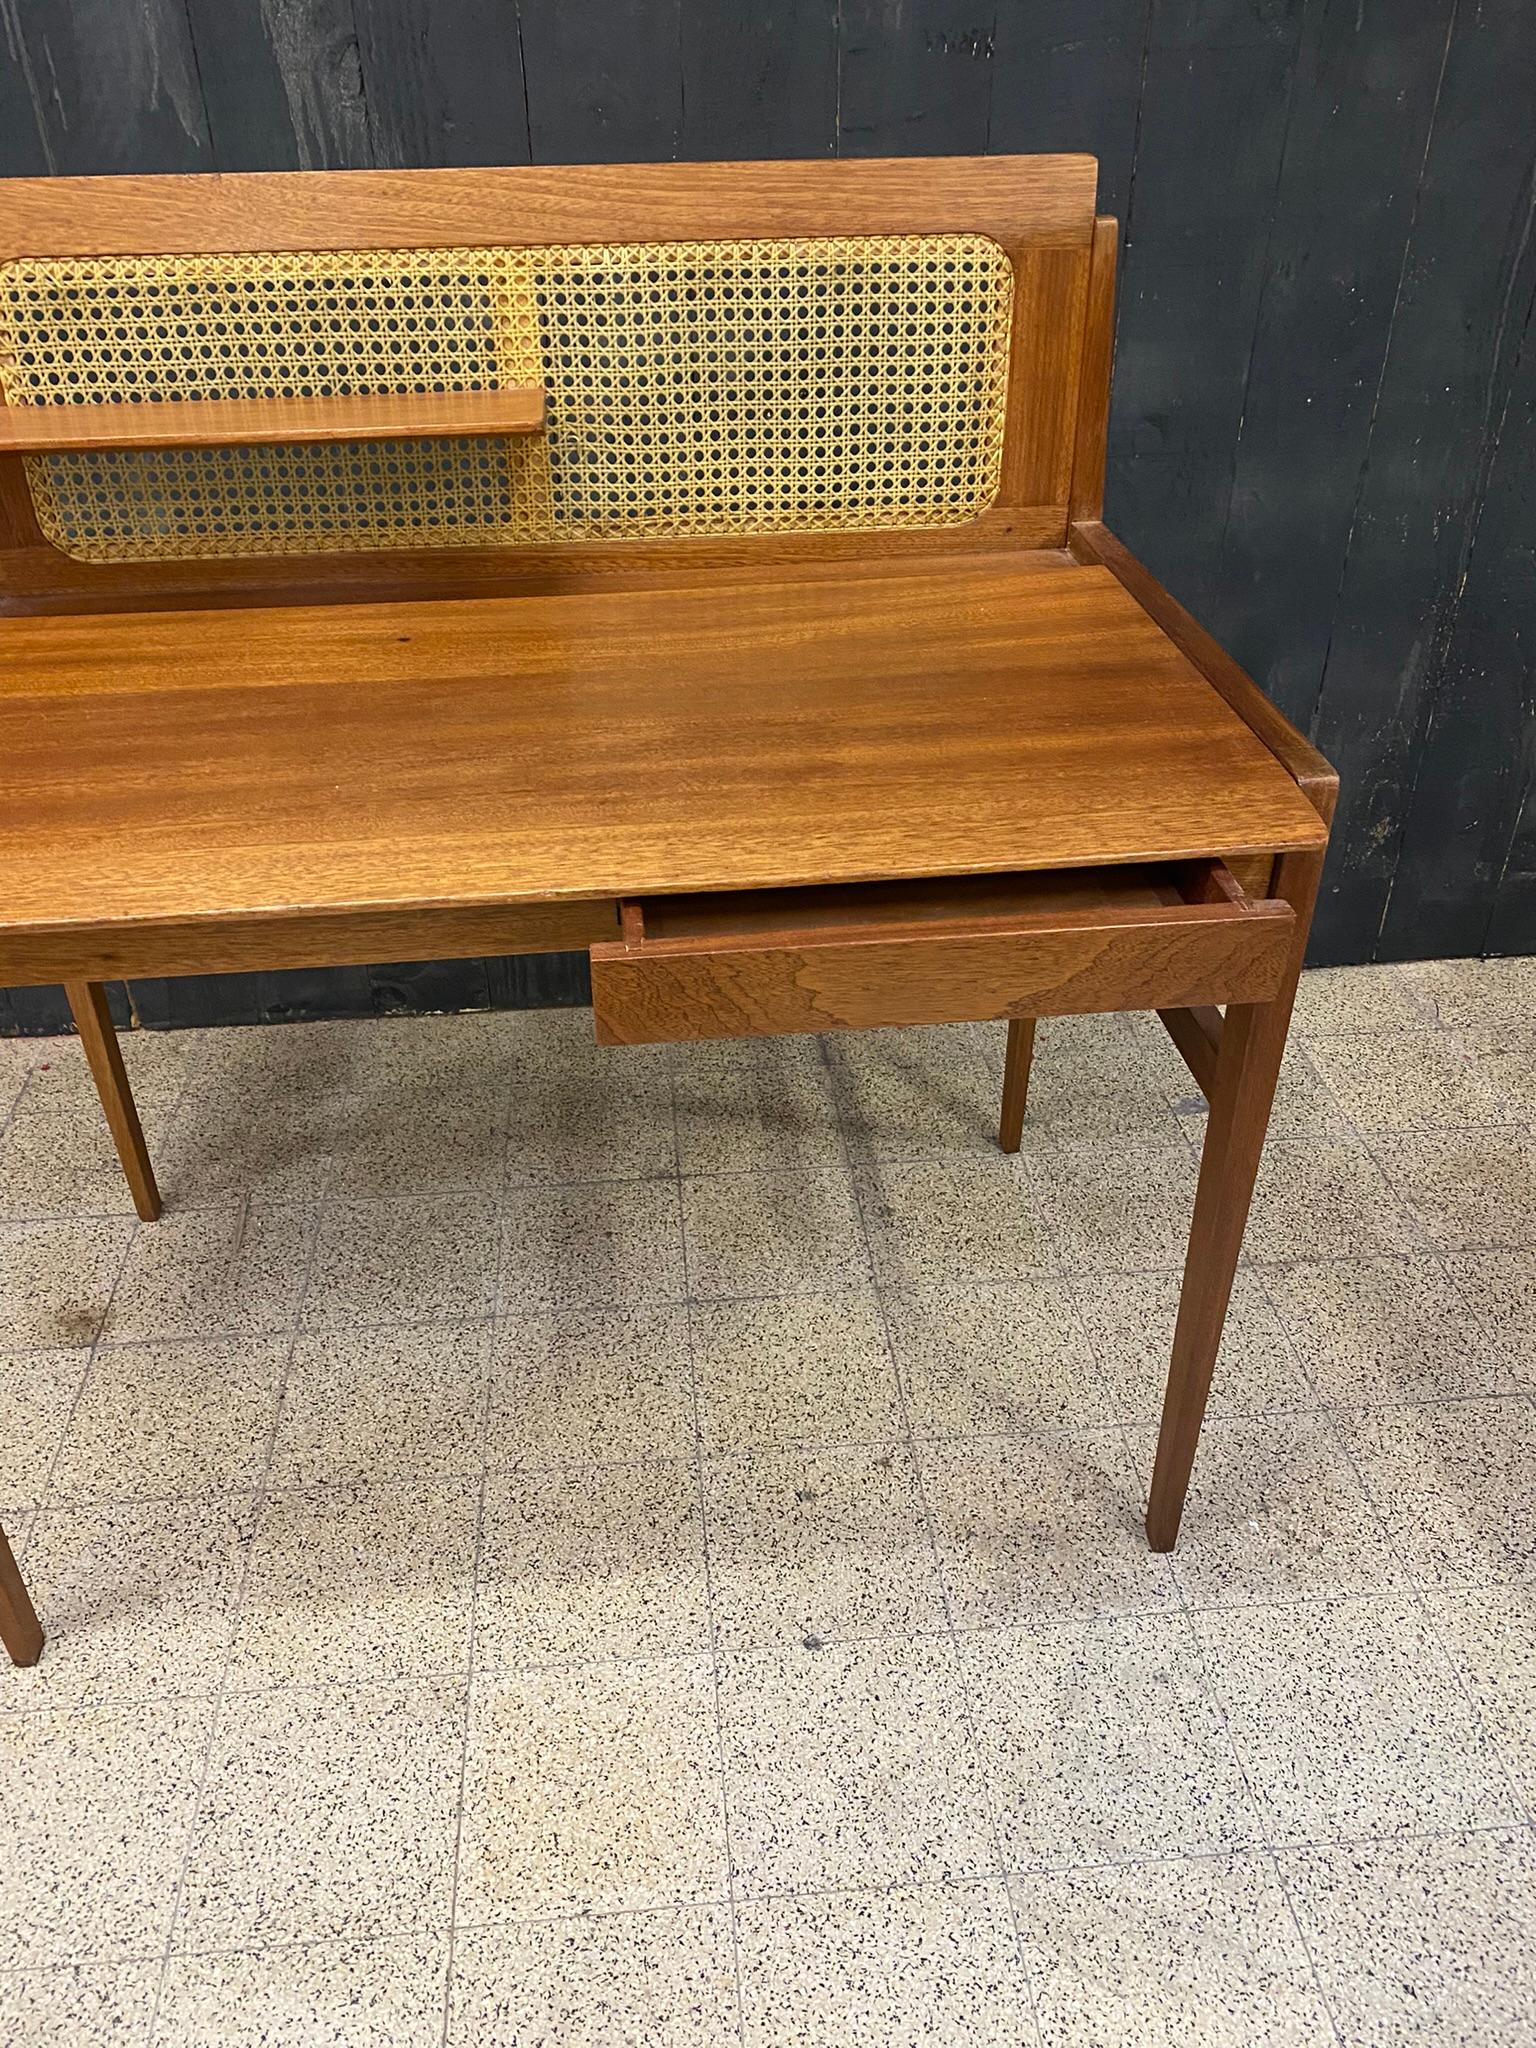 Roger Landault (attributed to) elegant mahogany desk table circa 1960 
Fully restored
Two desks are available.